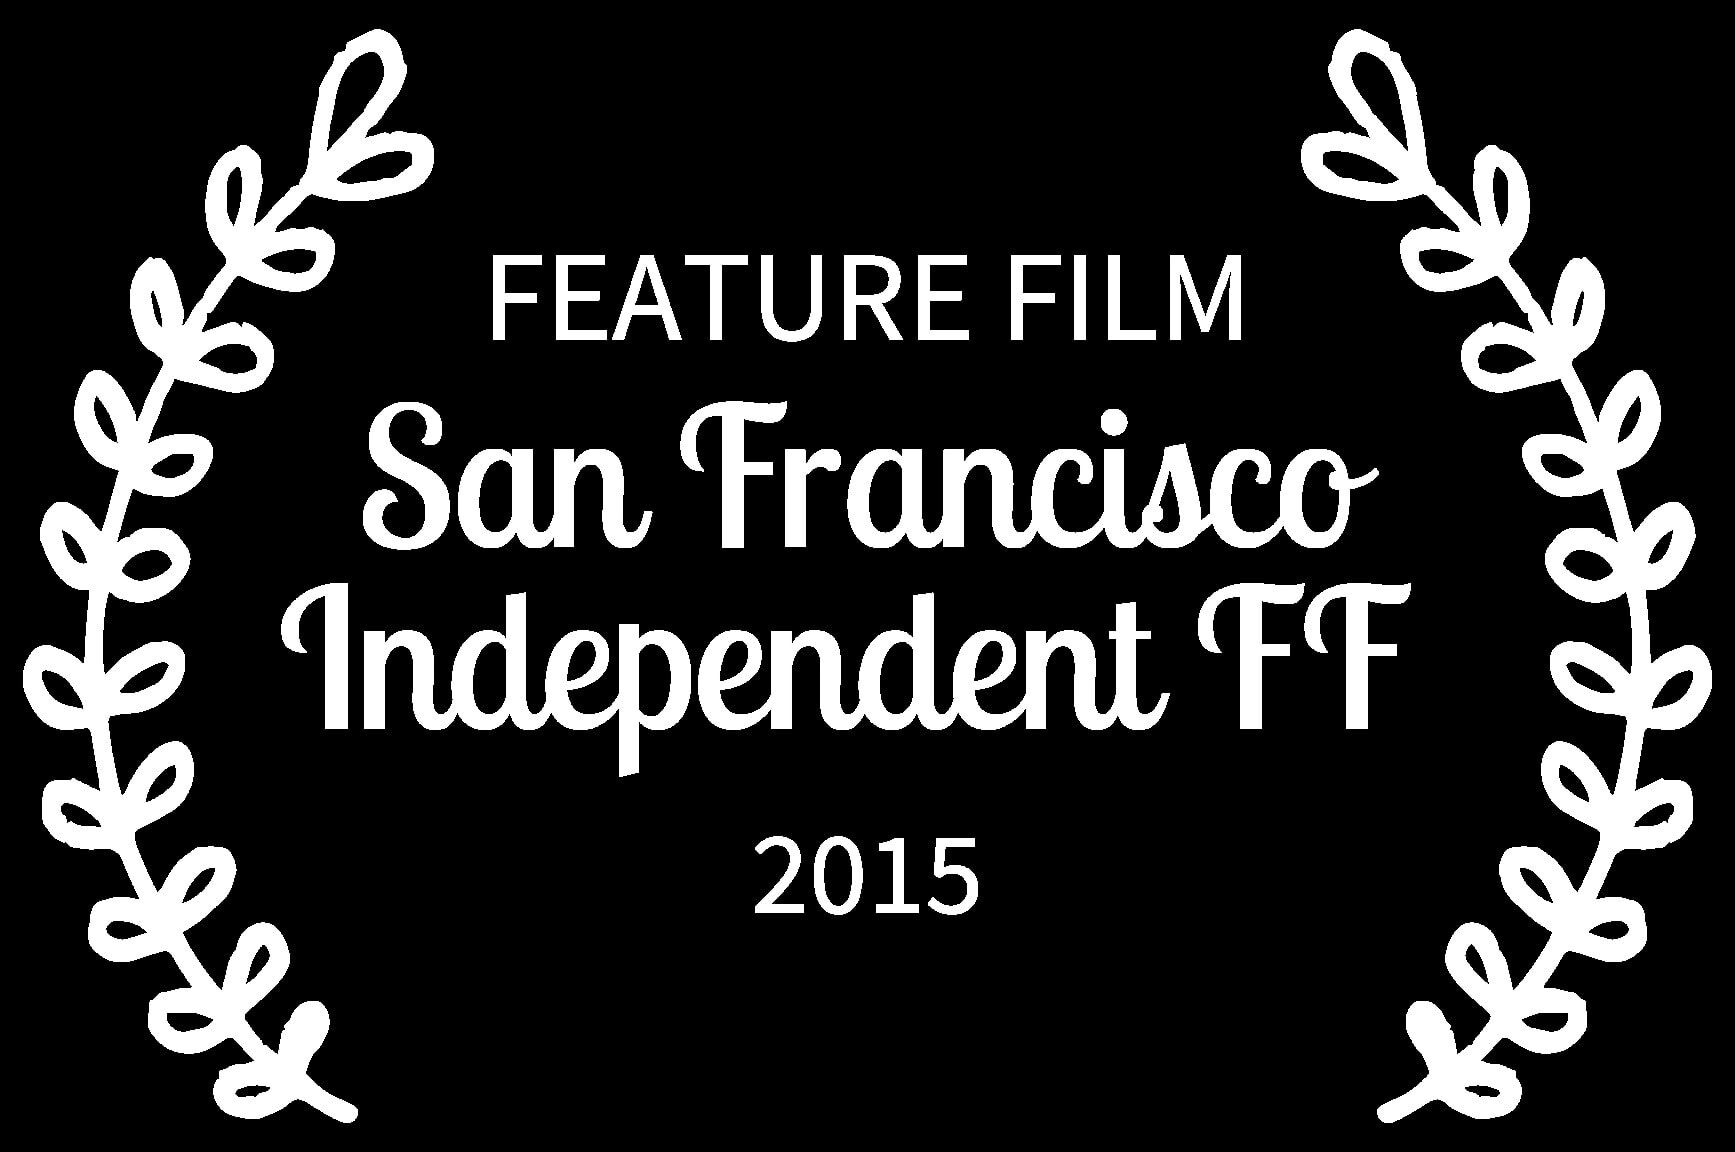 FEATURE FILM - San Francisco Independent FF  - 2015 - ITTRW